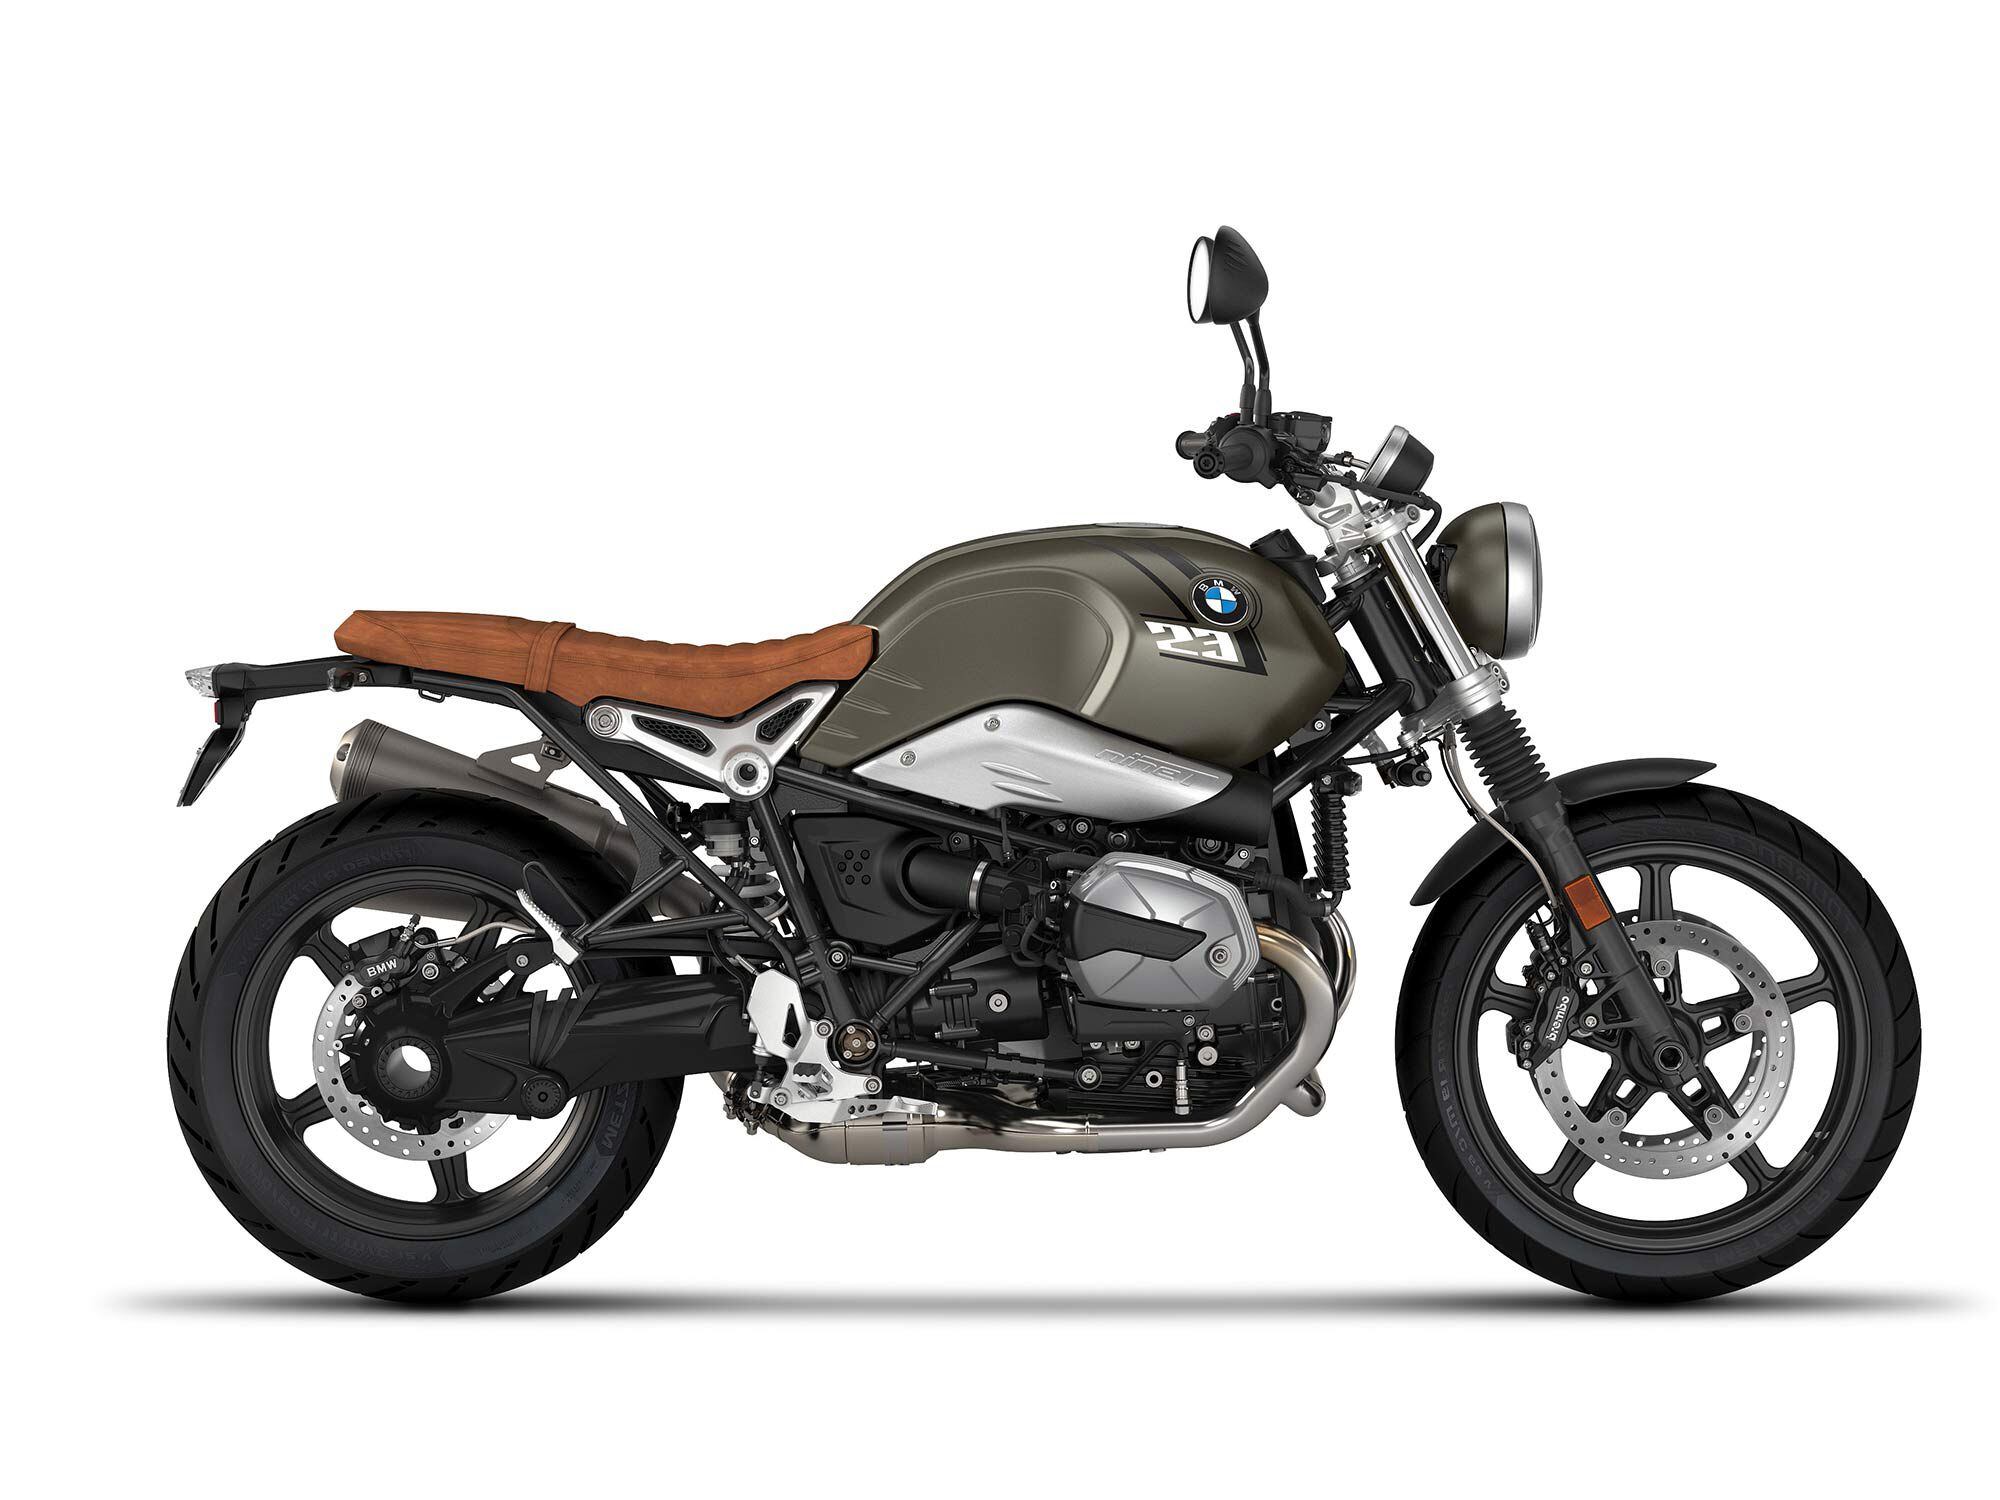 The R nineT Scrambler adds the Select Package for US models in 2023. Here’s the new Manhattan Metallic Matte color with a brown seat.